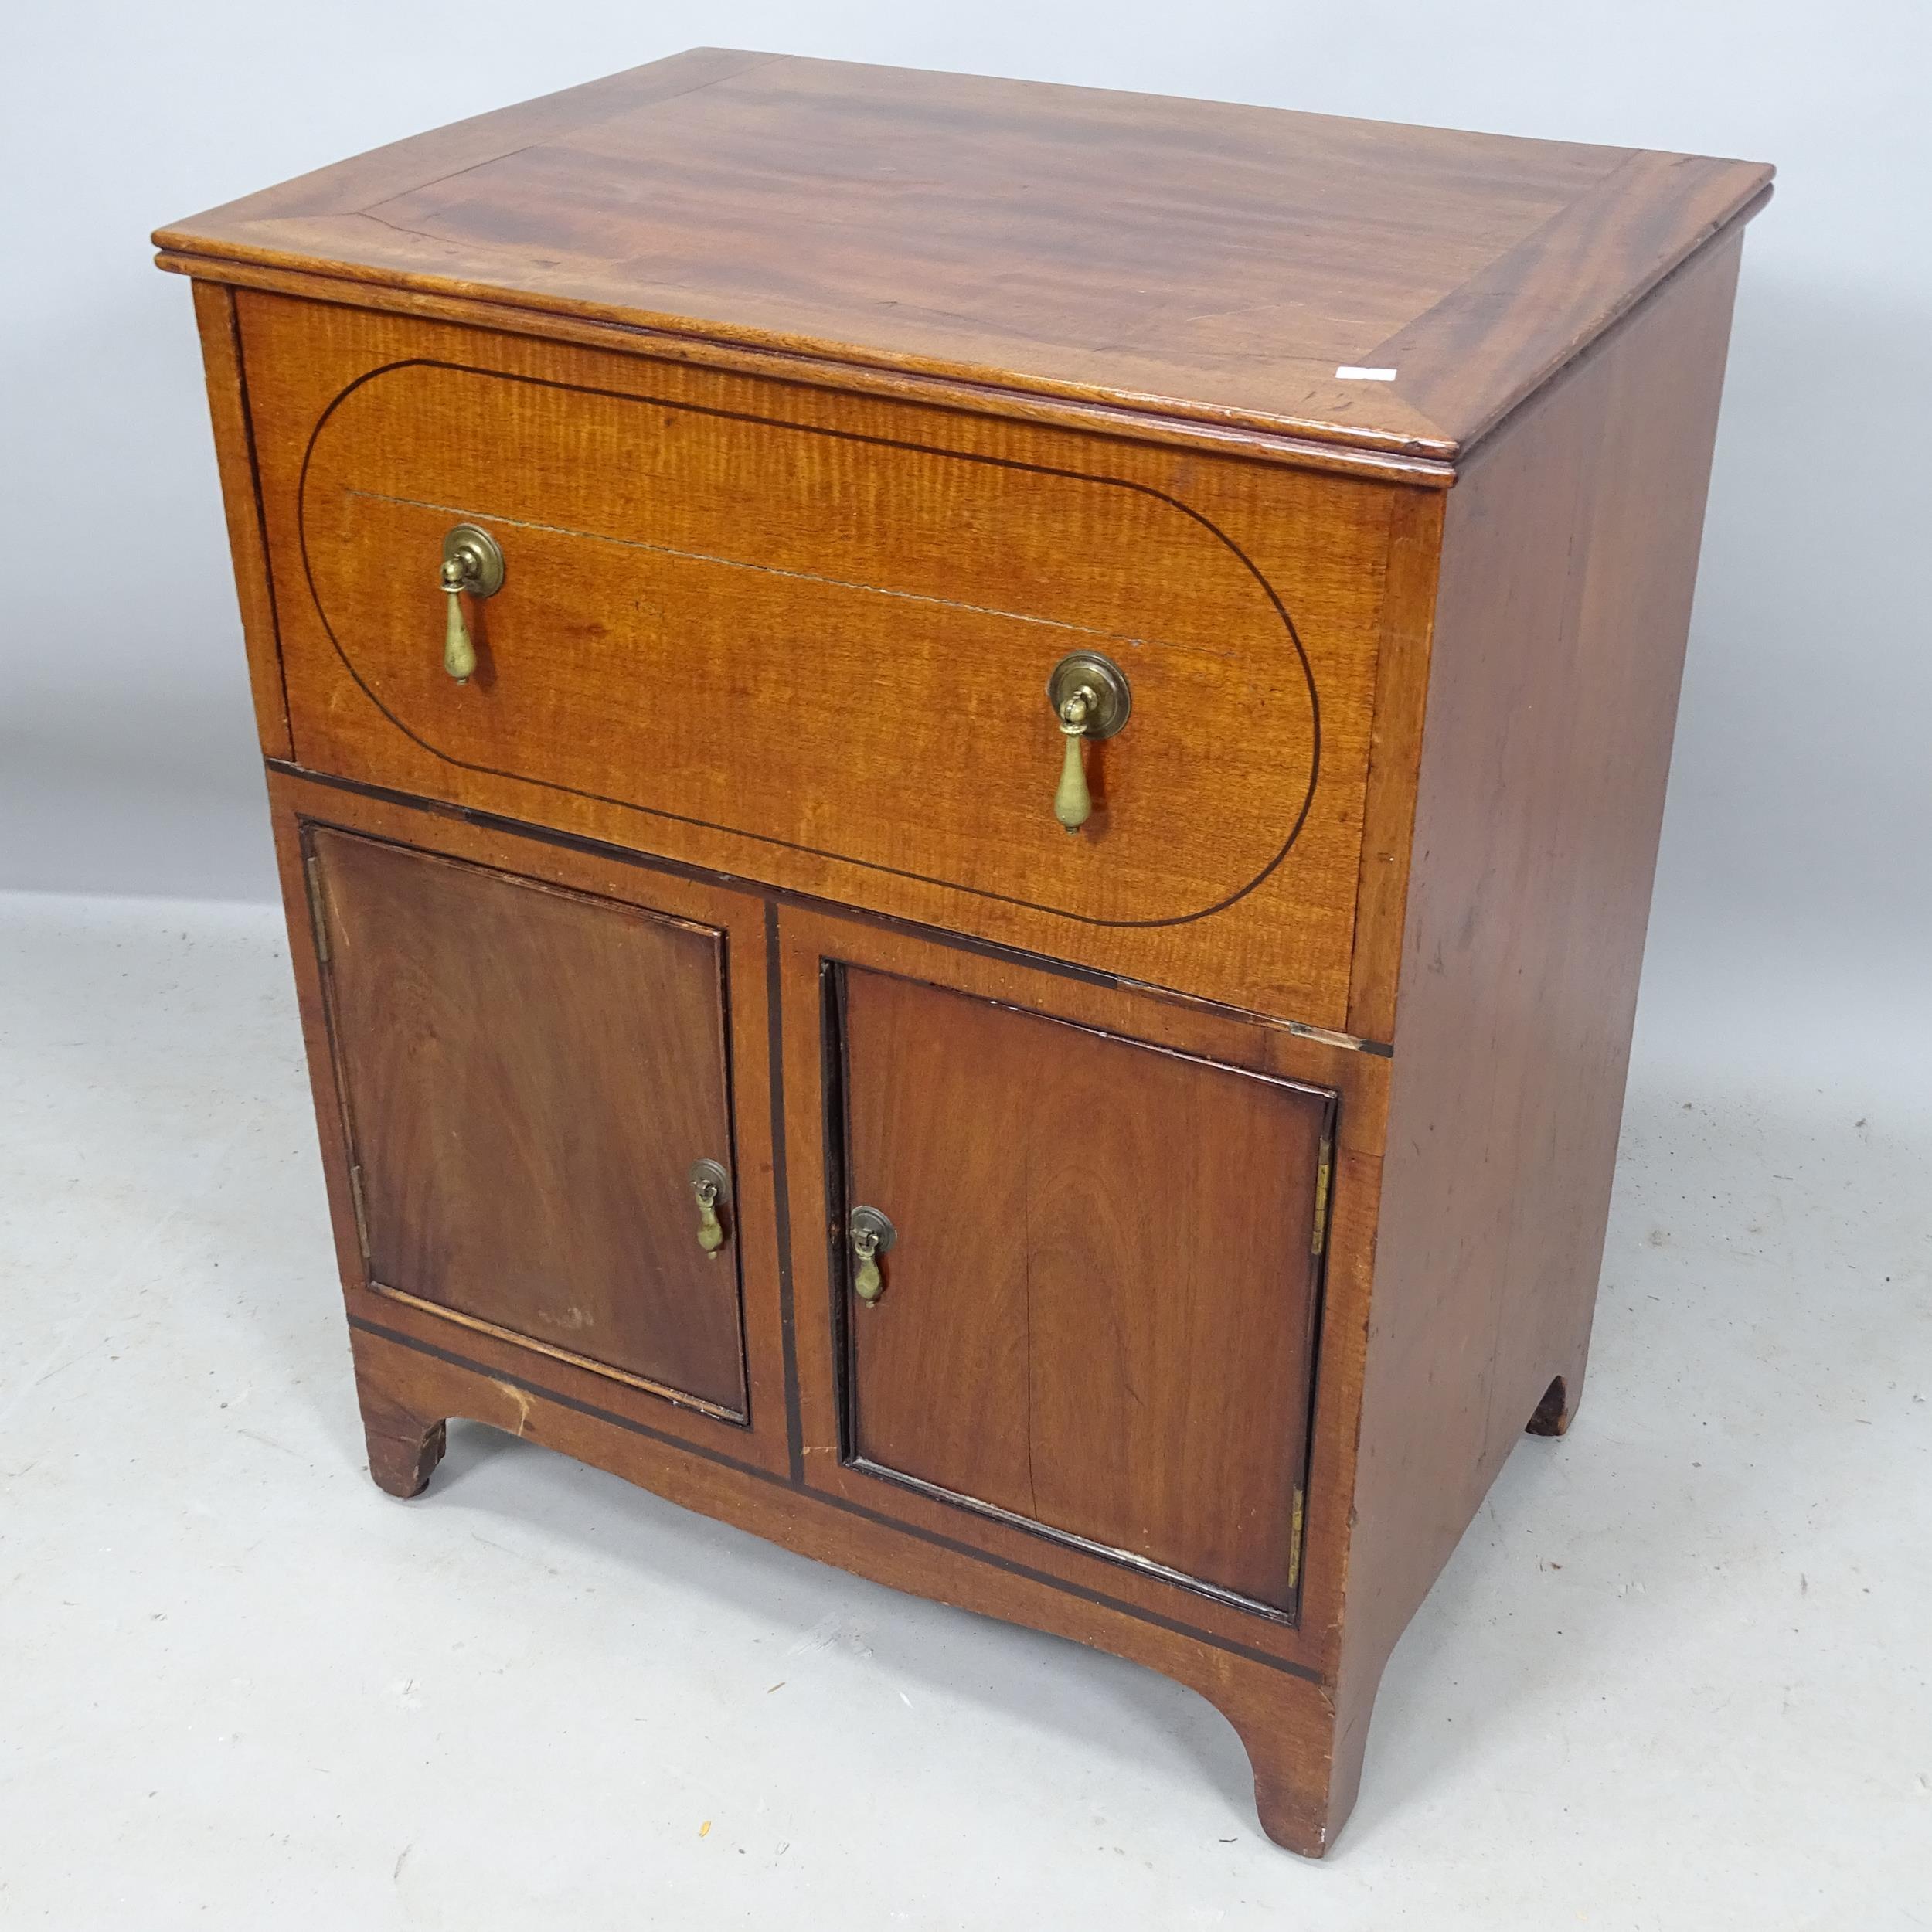 An Edwardian mahogany side cabinet, with single fitted drawer and cupboards under, 60cm x 72cm x